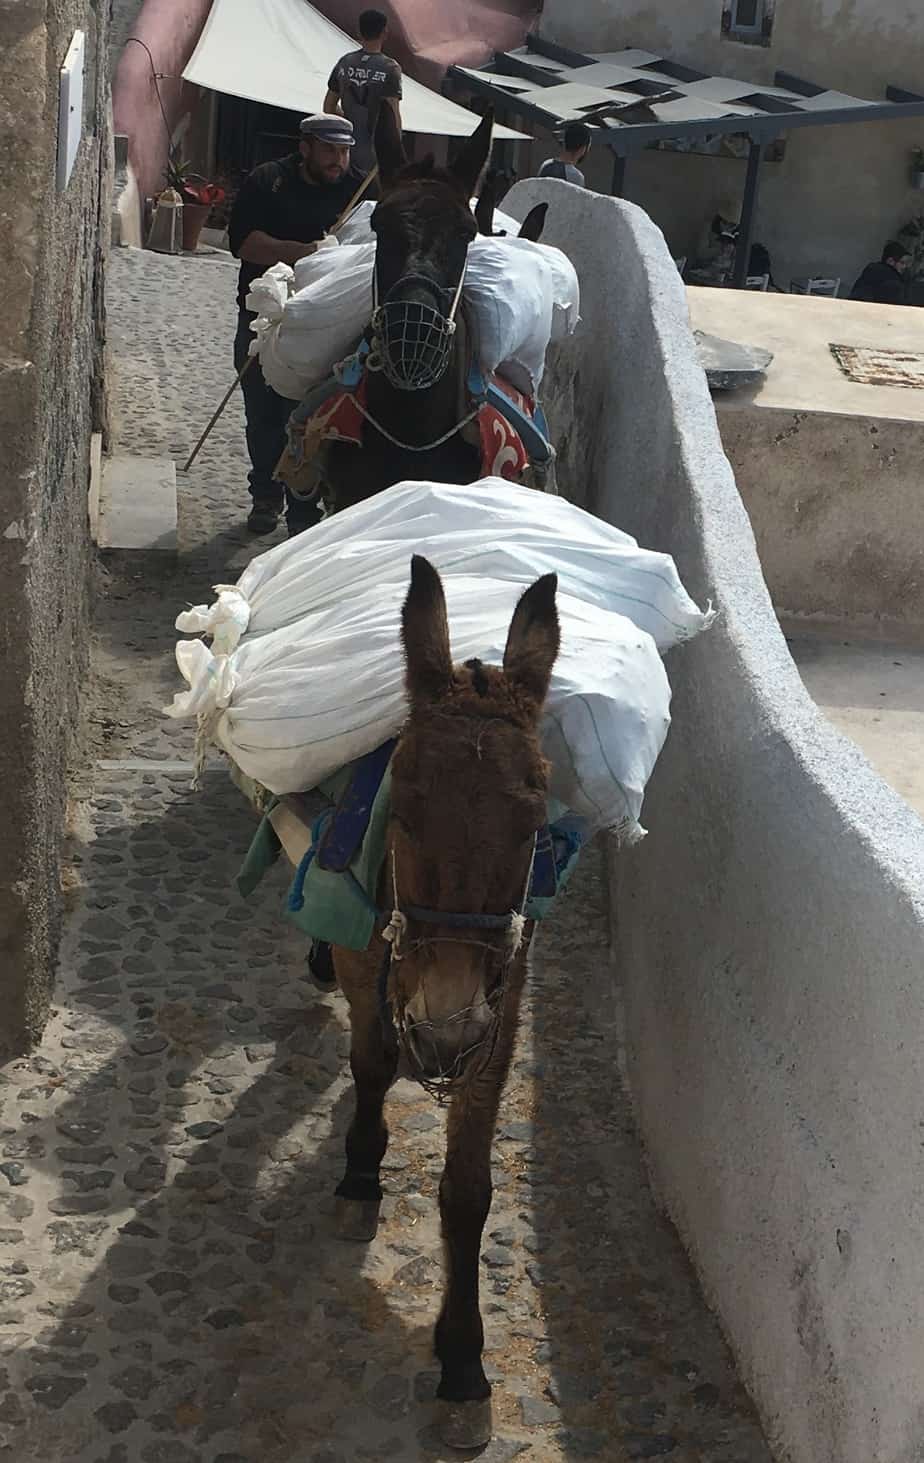 Mules Streets in Oia